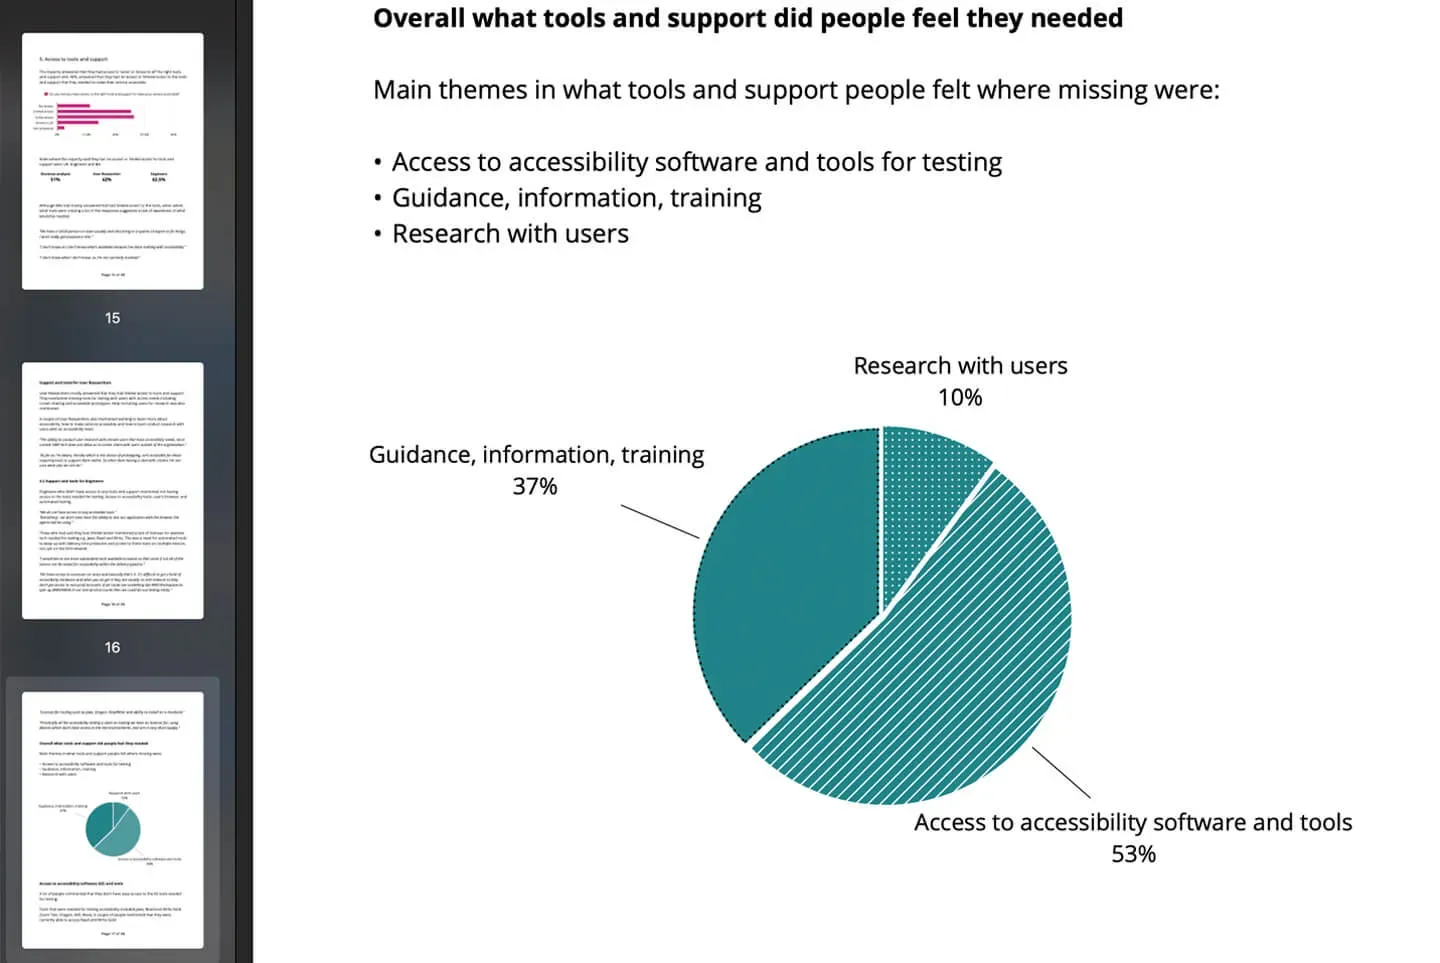 A page of research showing a pie chart with the figures described above. They are: 37% lack guidance information and training. 53% lack software and tools. 10% struggle to recruit users.